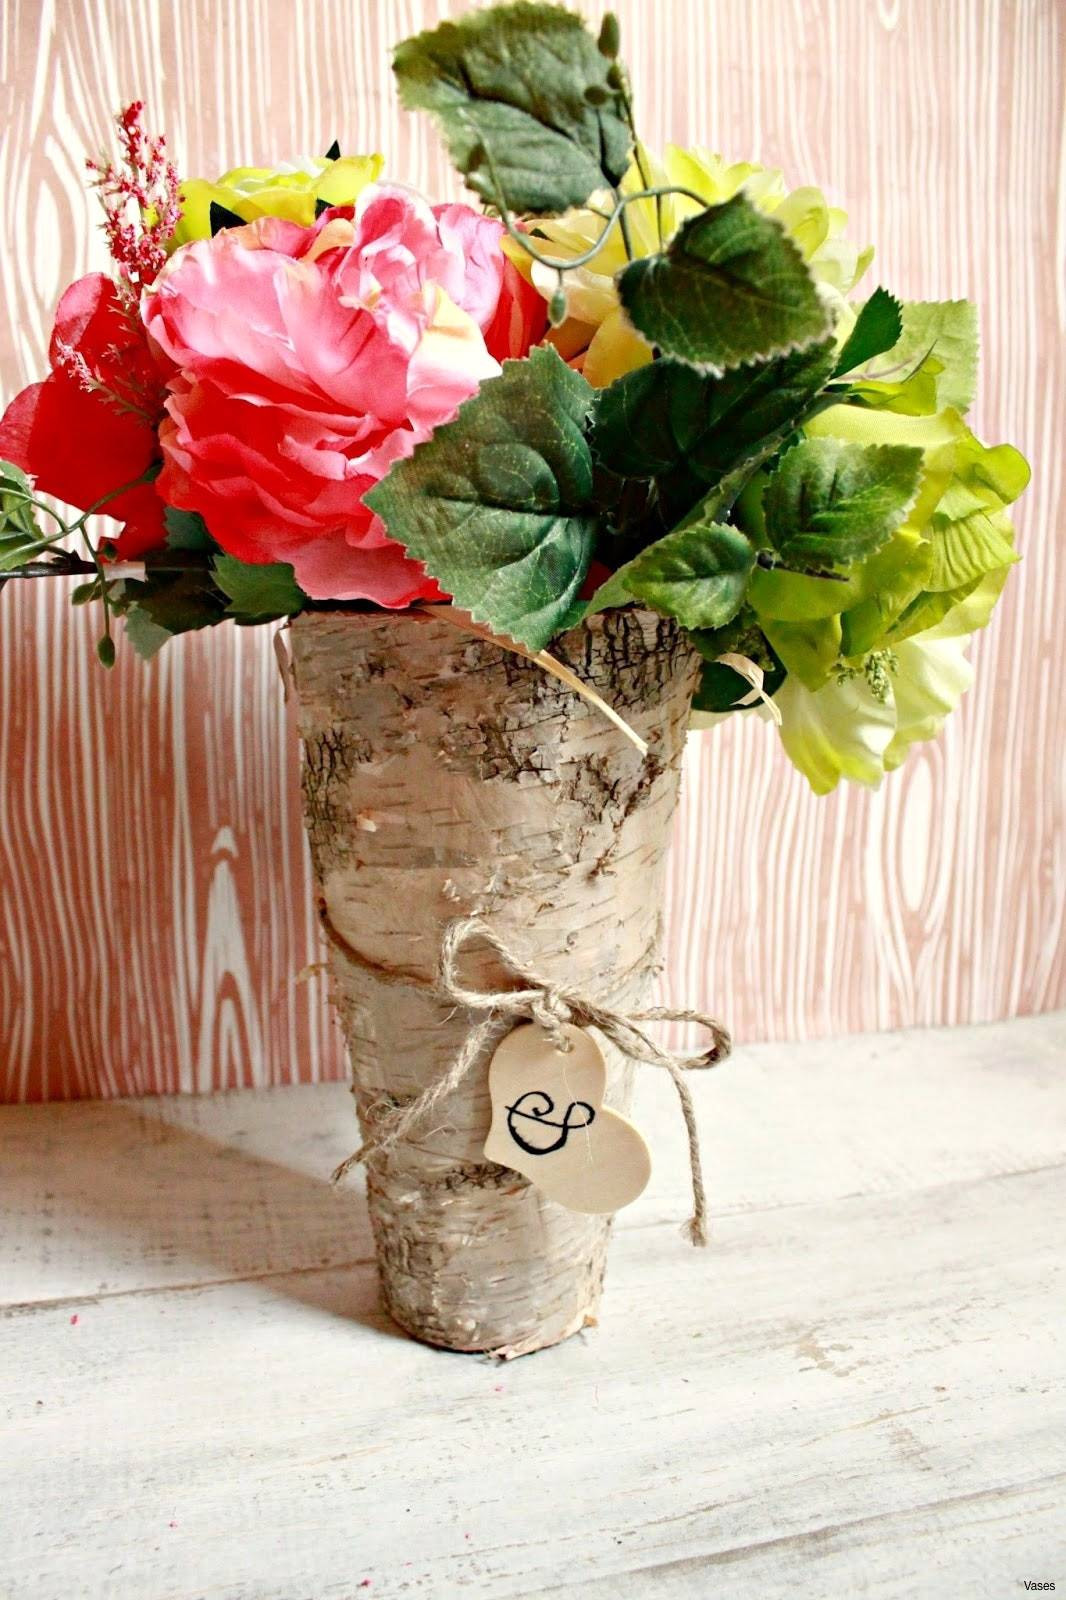 vintage wedding centerpiece vases of pink and gray wedding decorations simple flowers and decorations for for pink and gray wedding decorations simple flowers and decorations for weddings h vases diy wood vase